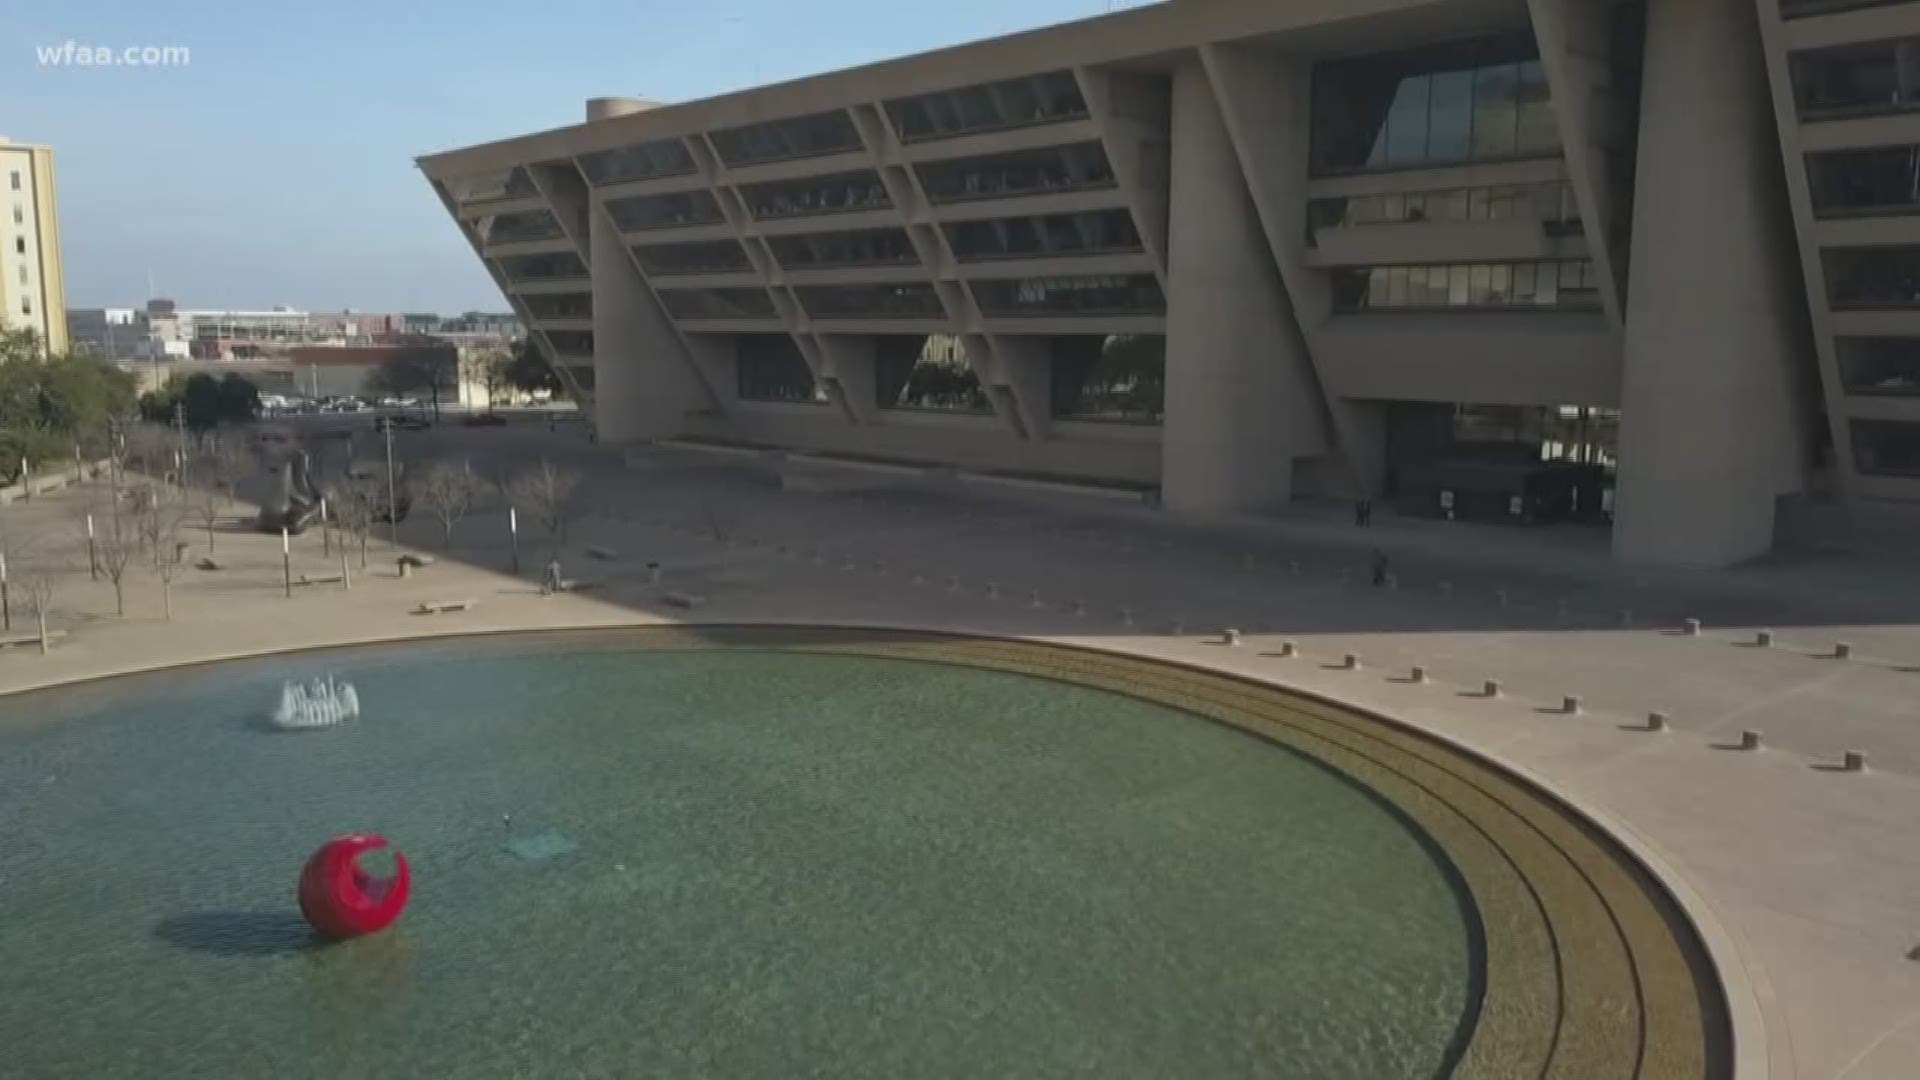 I.M. Pei designed Dallas City Hall, One Dallas Center, Energy Plaza, Fountain Place, and the Morton H. Meyerson Symphony Center. His death at the age of 102 was announced Thursday.